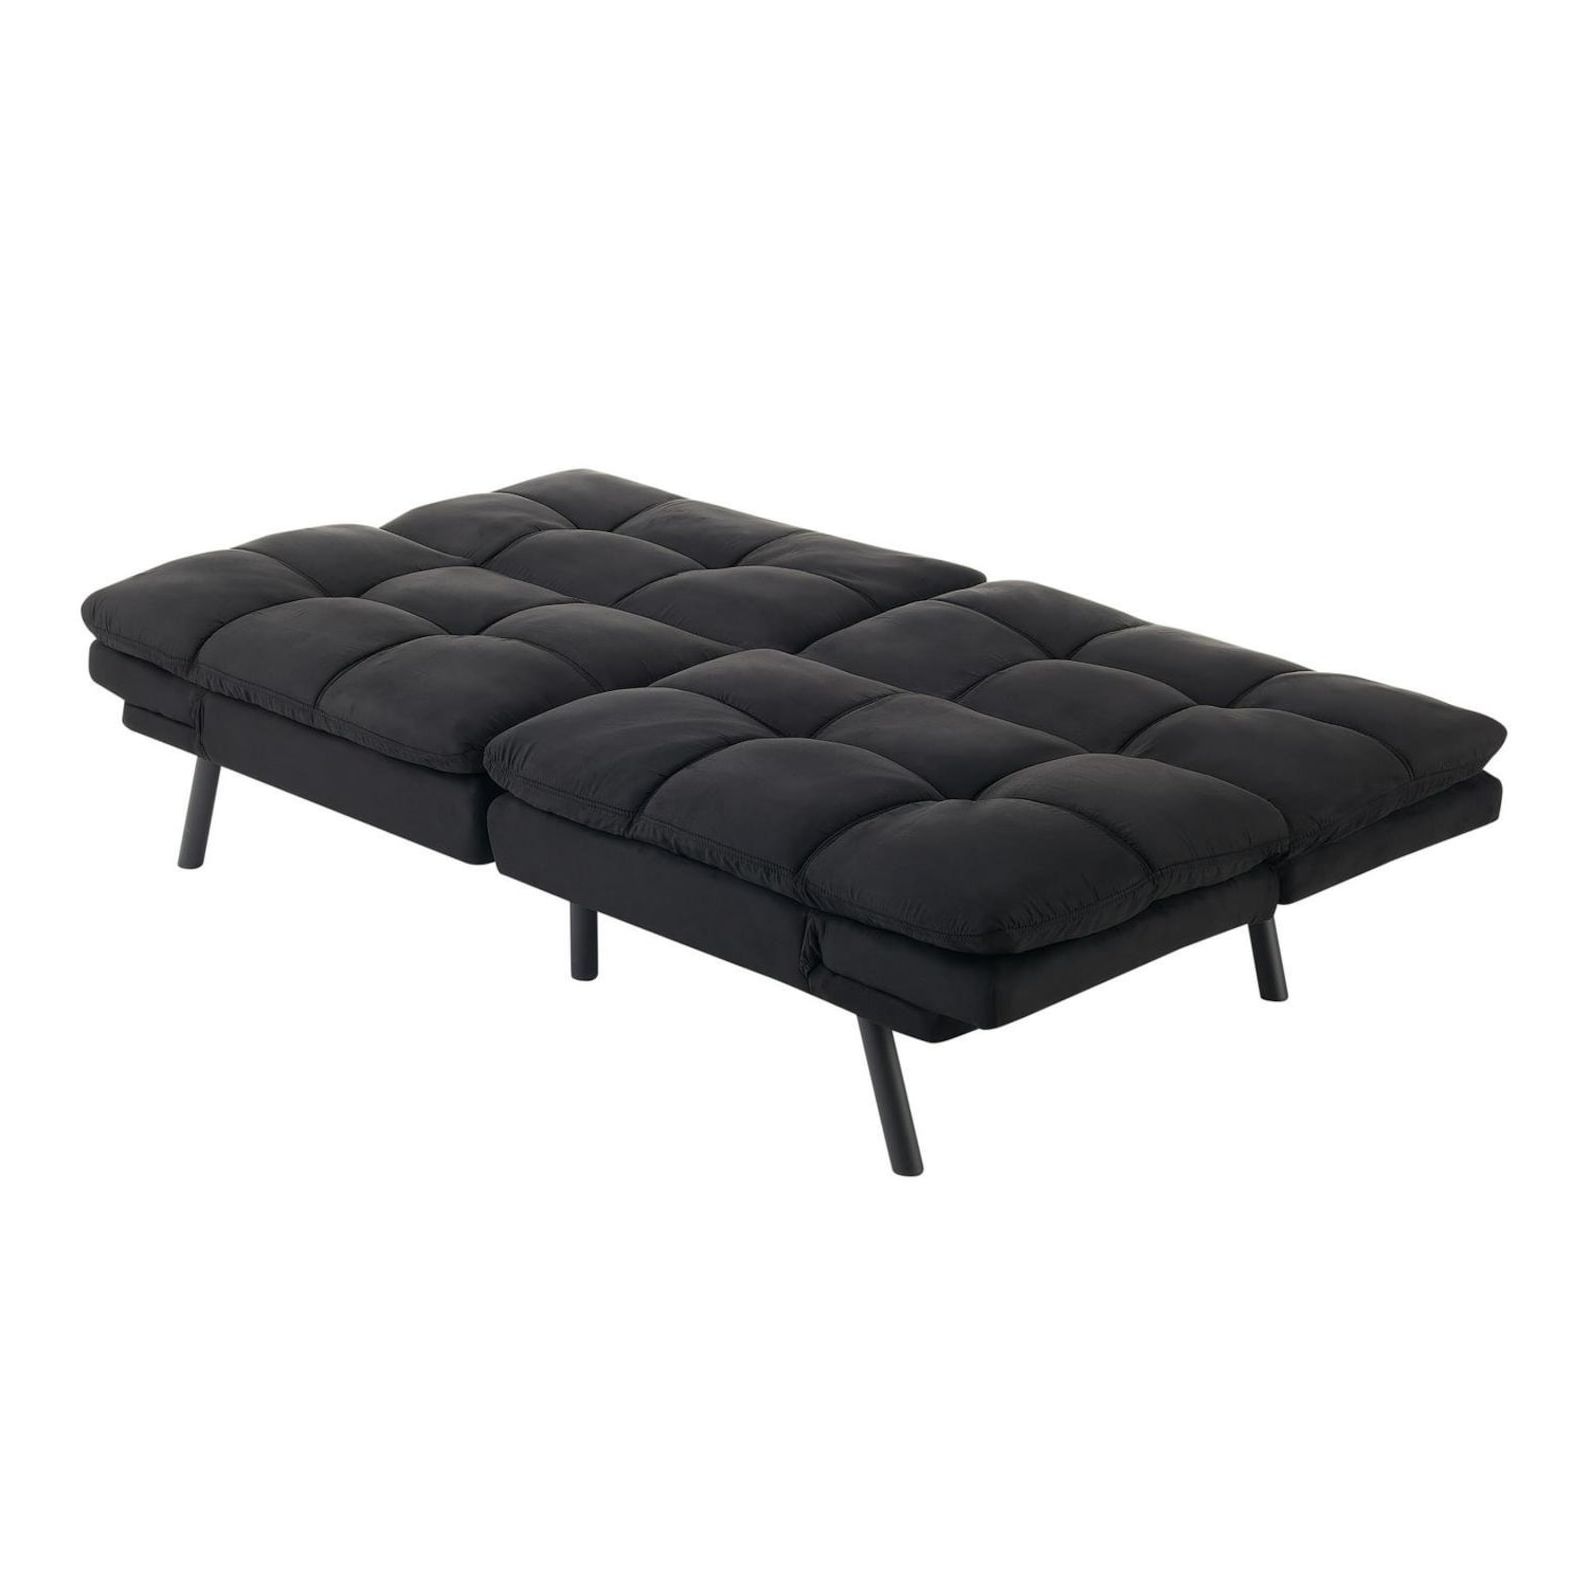 Etsy Intended For Popular Black Faux Suede Memory Foam Sofas (View 2 of 15)